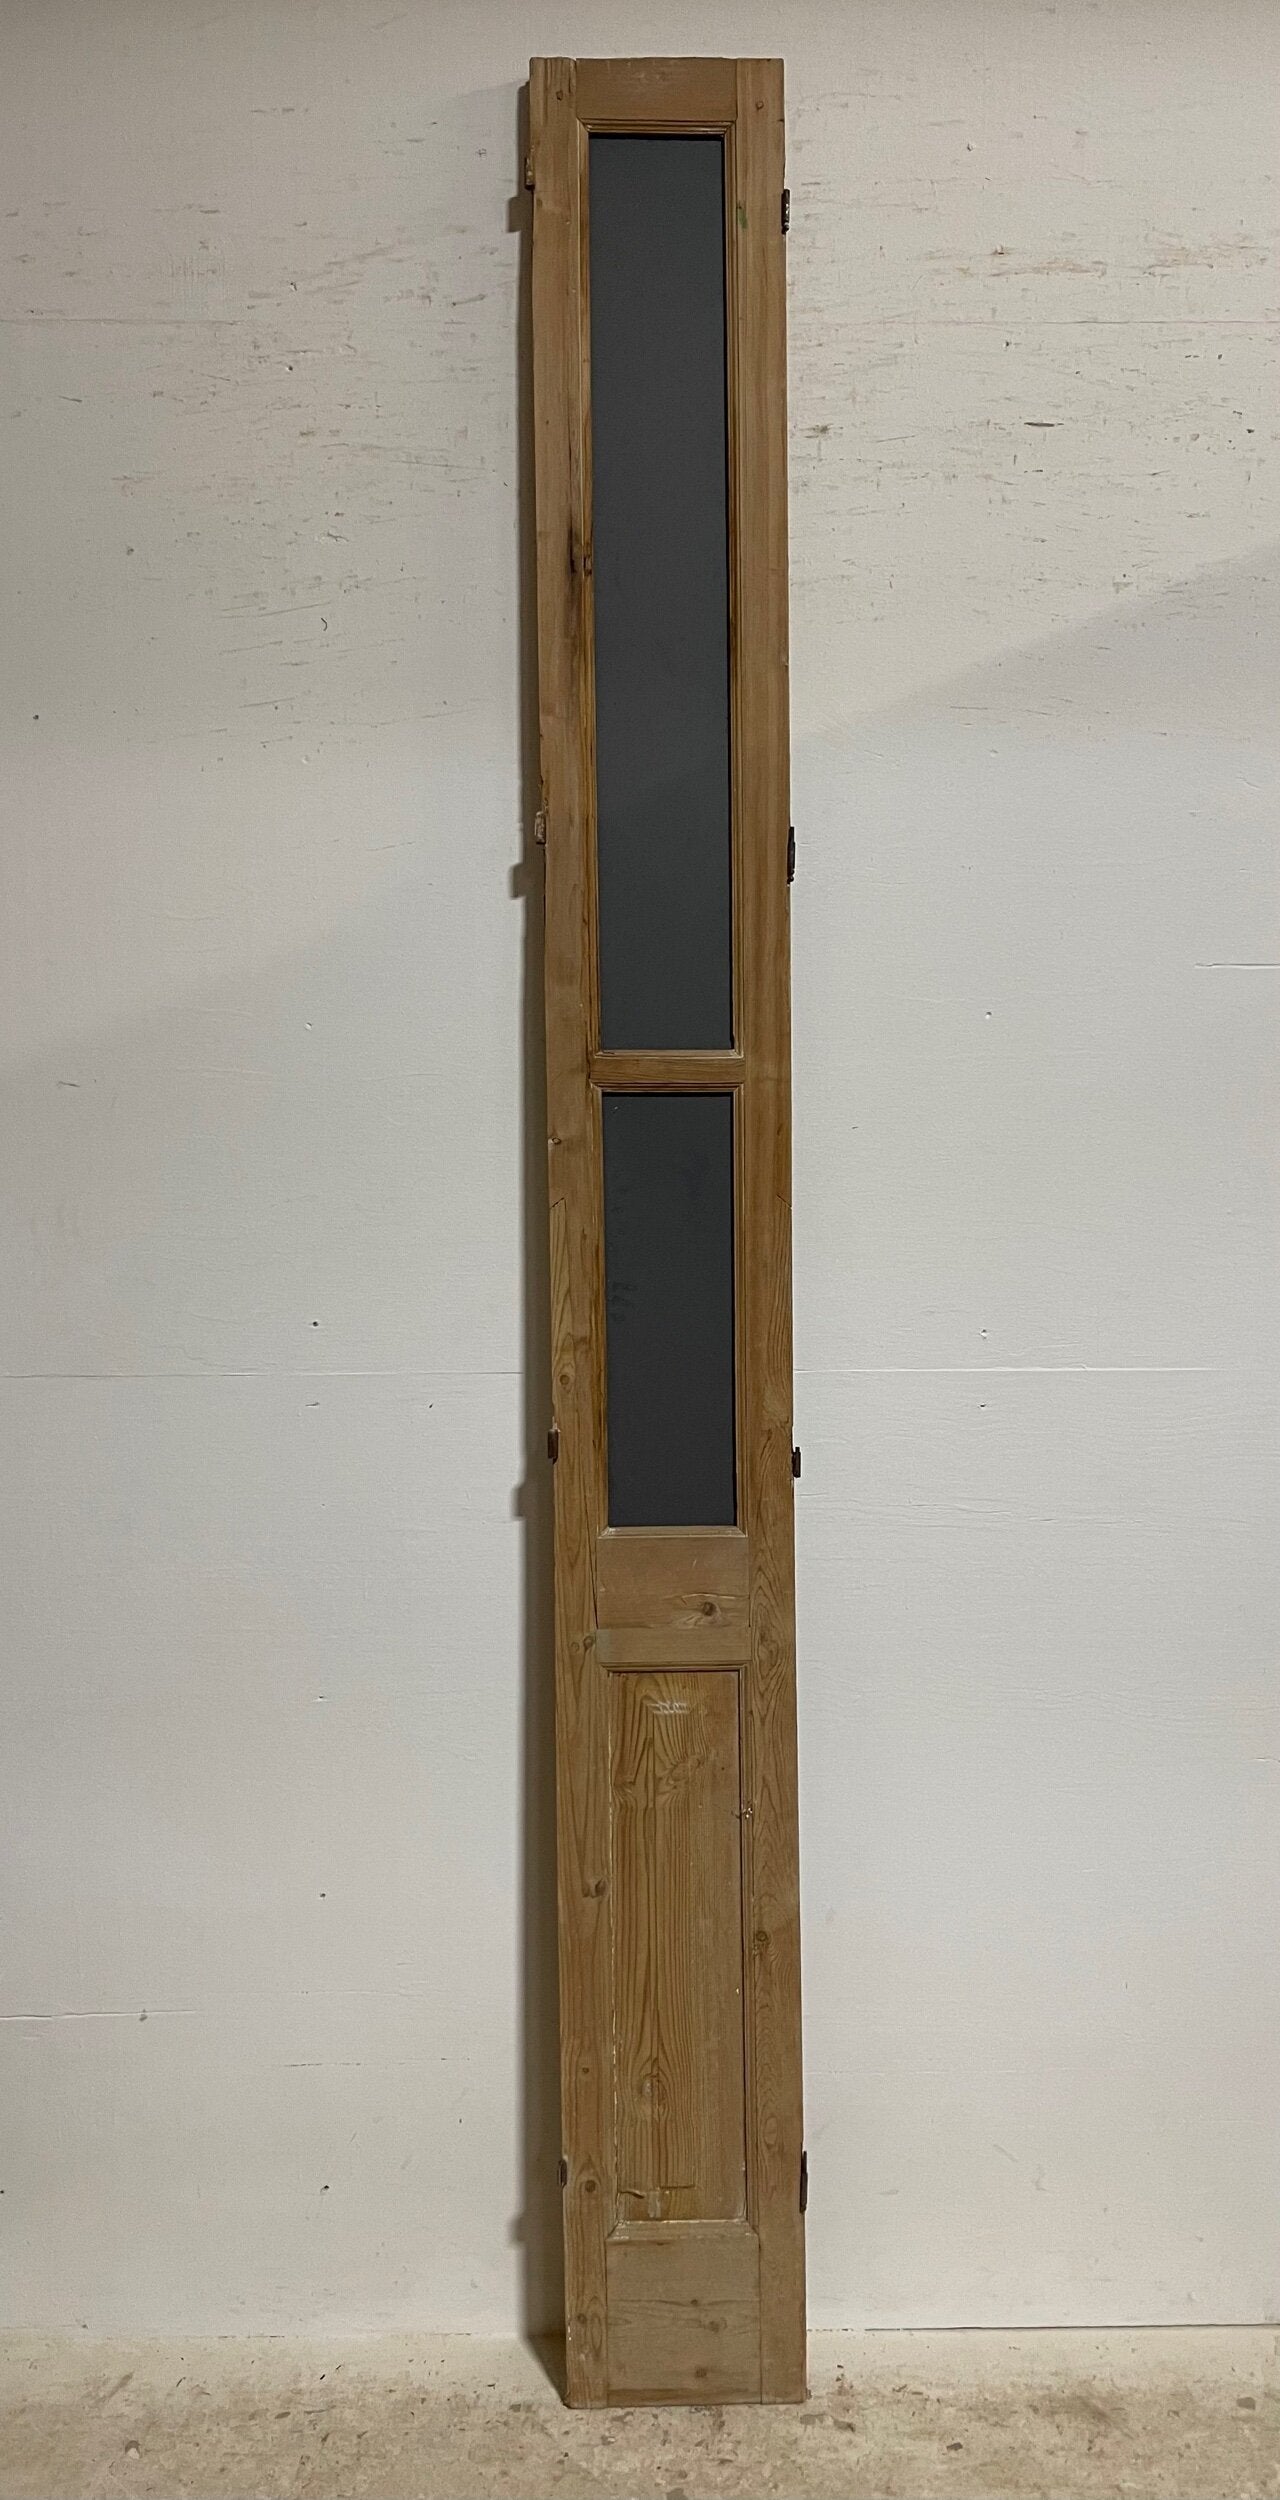 Antique French door with mirror (106.5x11) H0268s